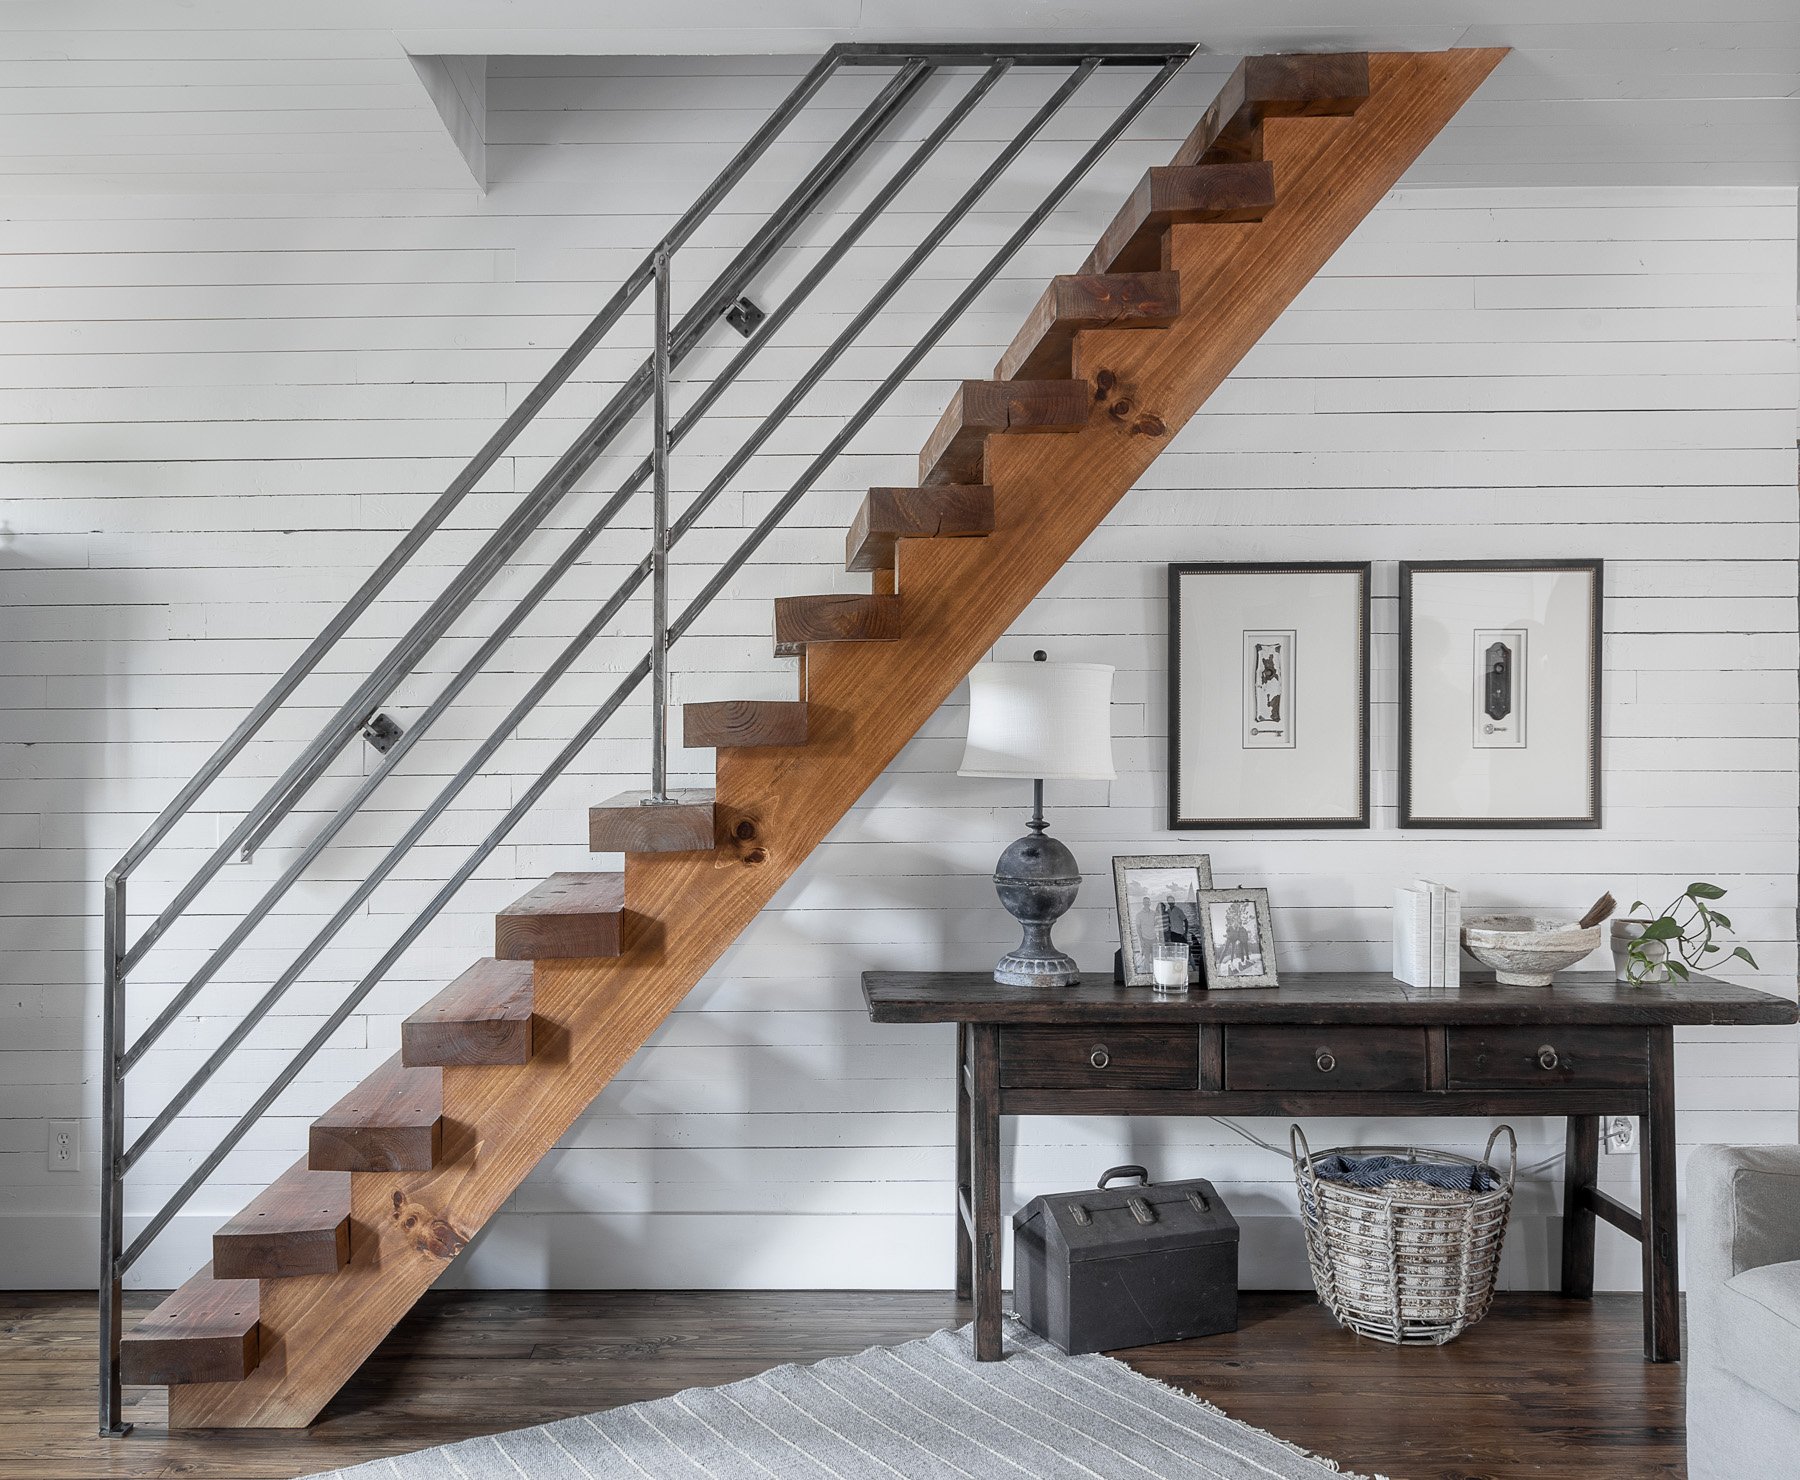 Modern minimalist home interior with floating wooden staircase, shiplap walls, and a chic console table.